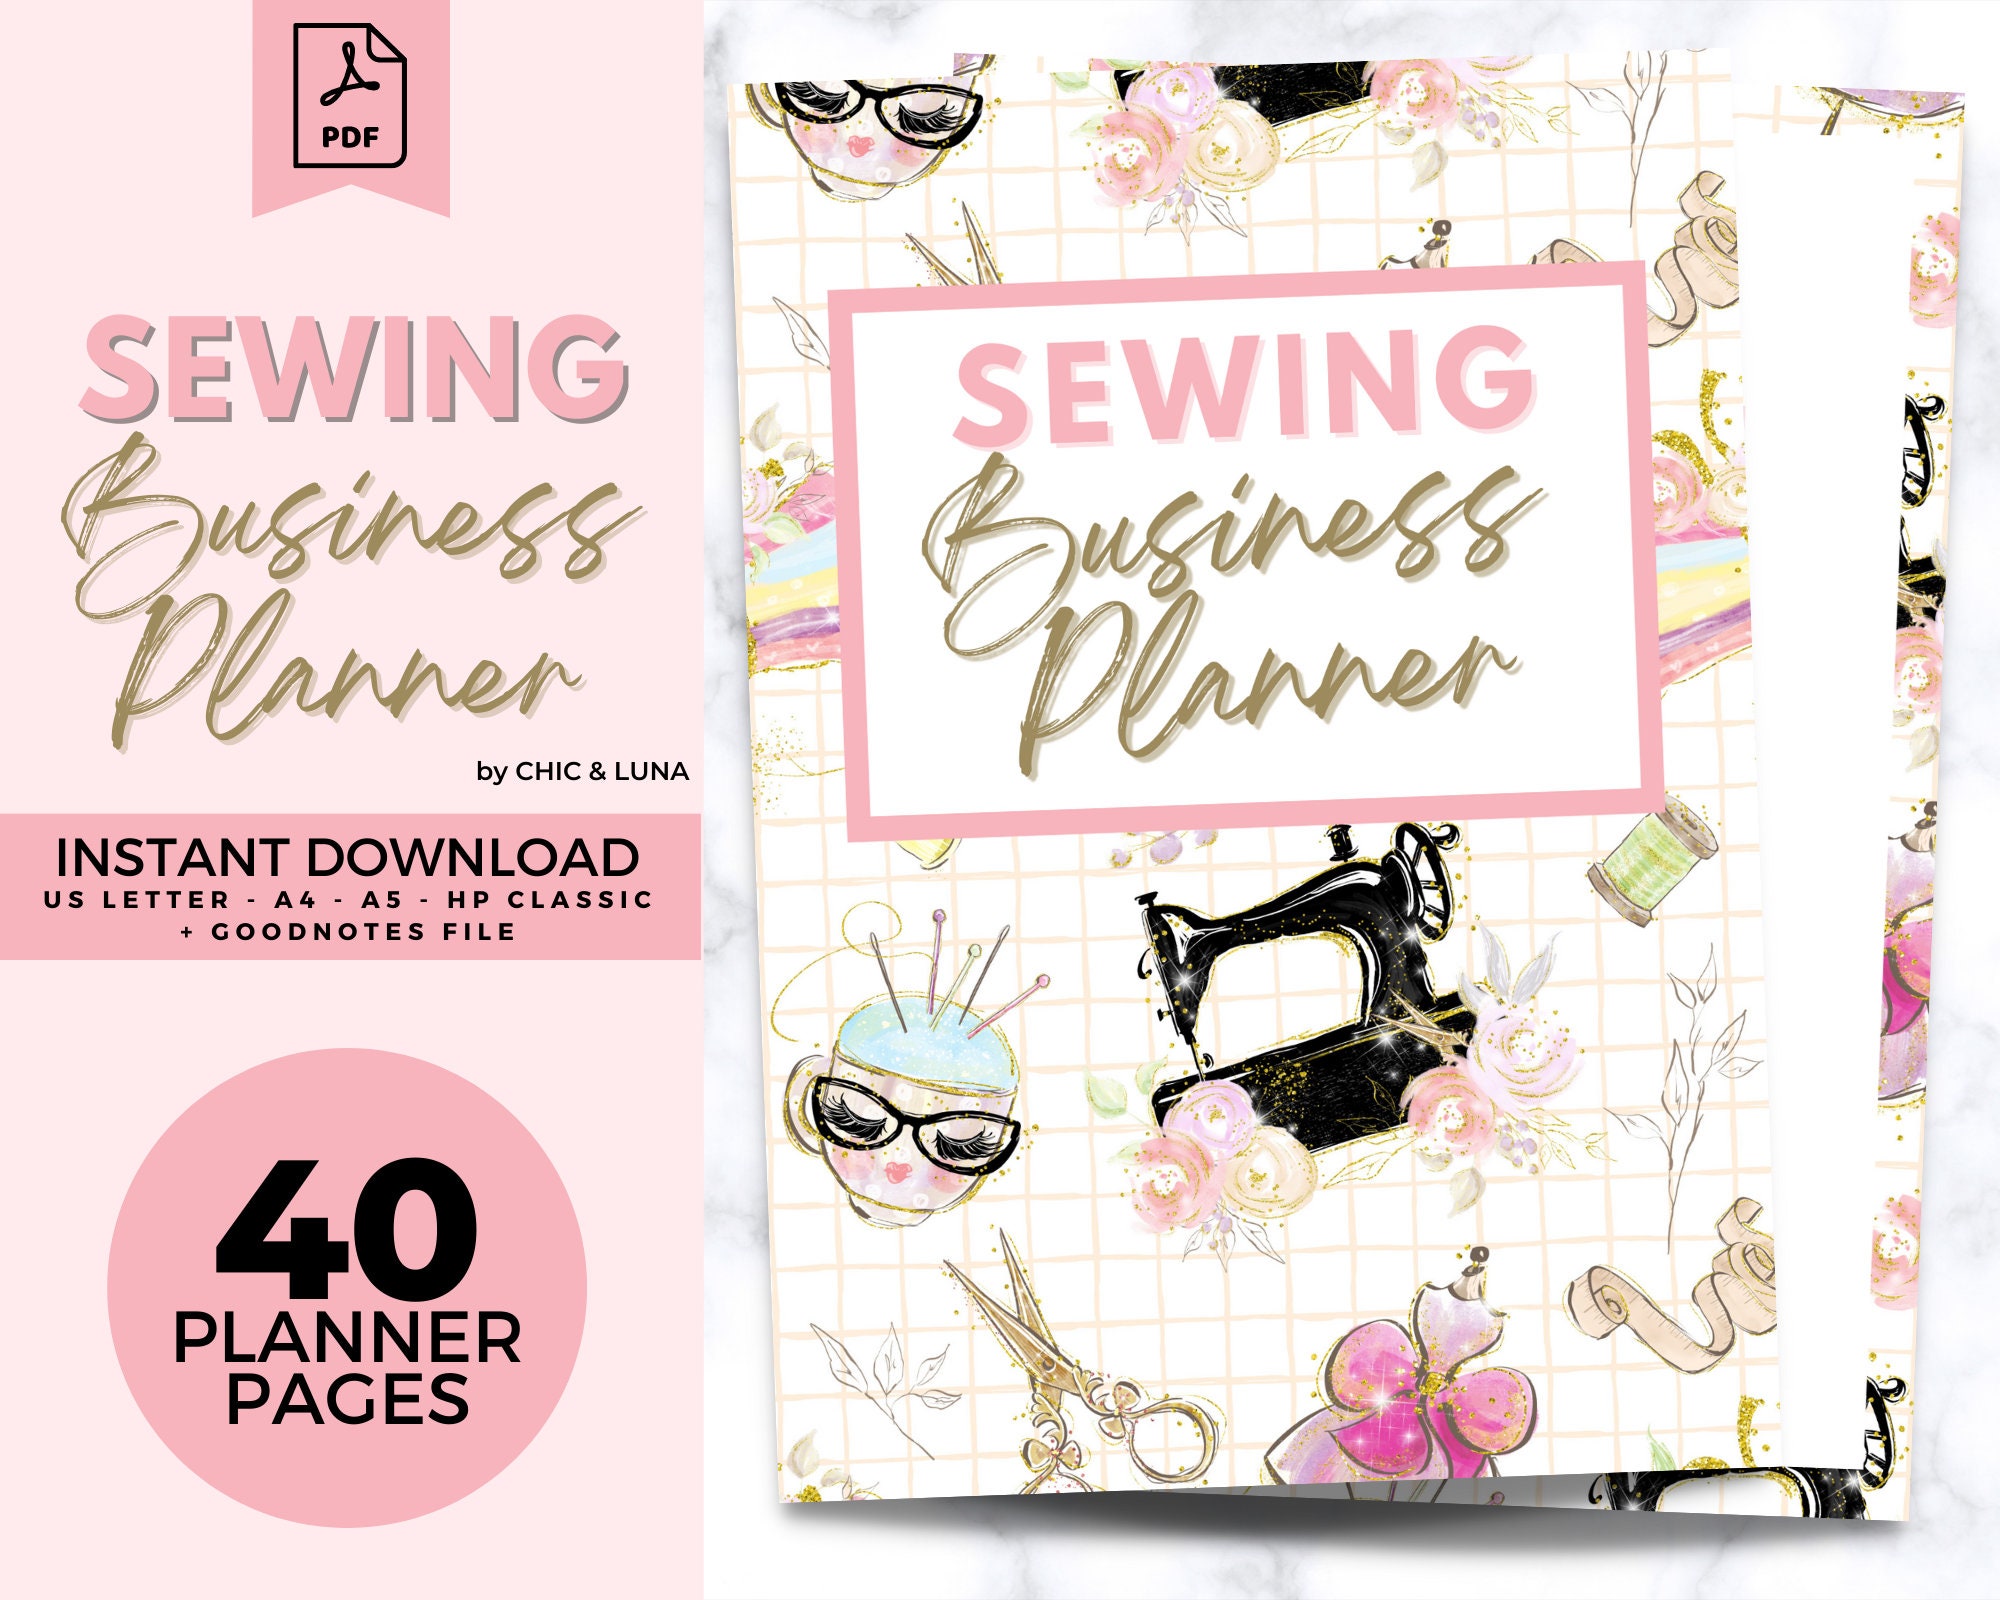 Sewing planner for Men's garments